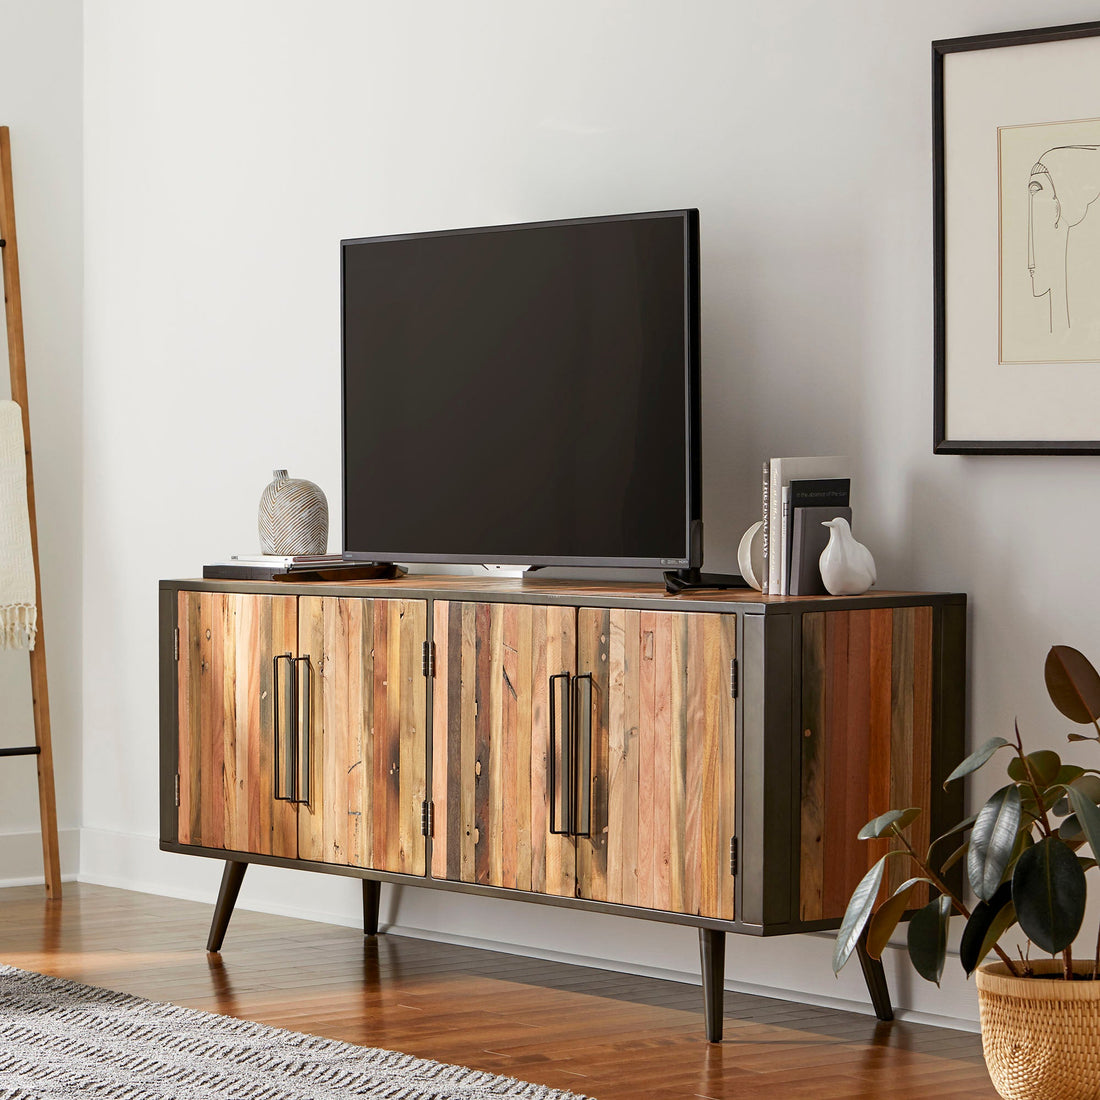 Nordic TV table with 4 doors